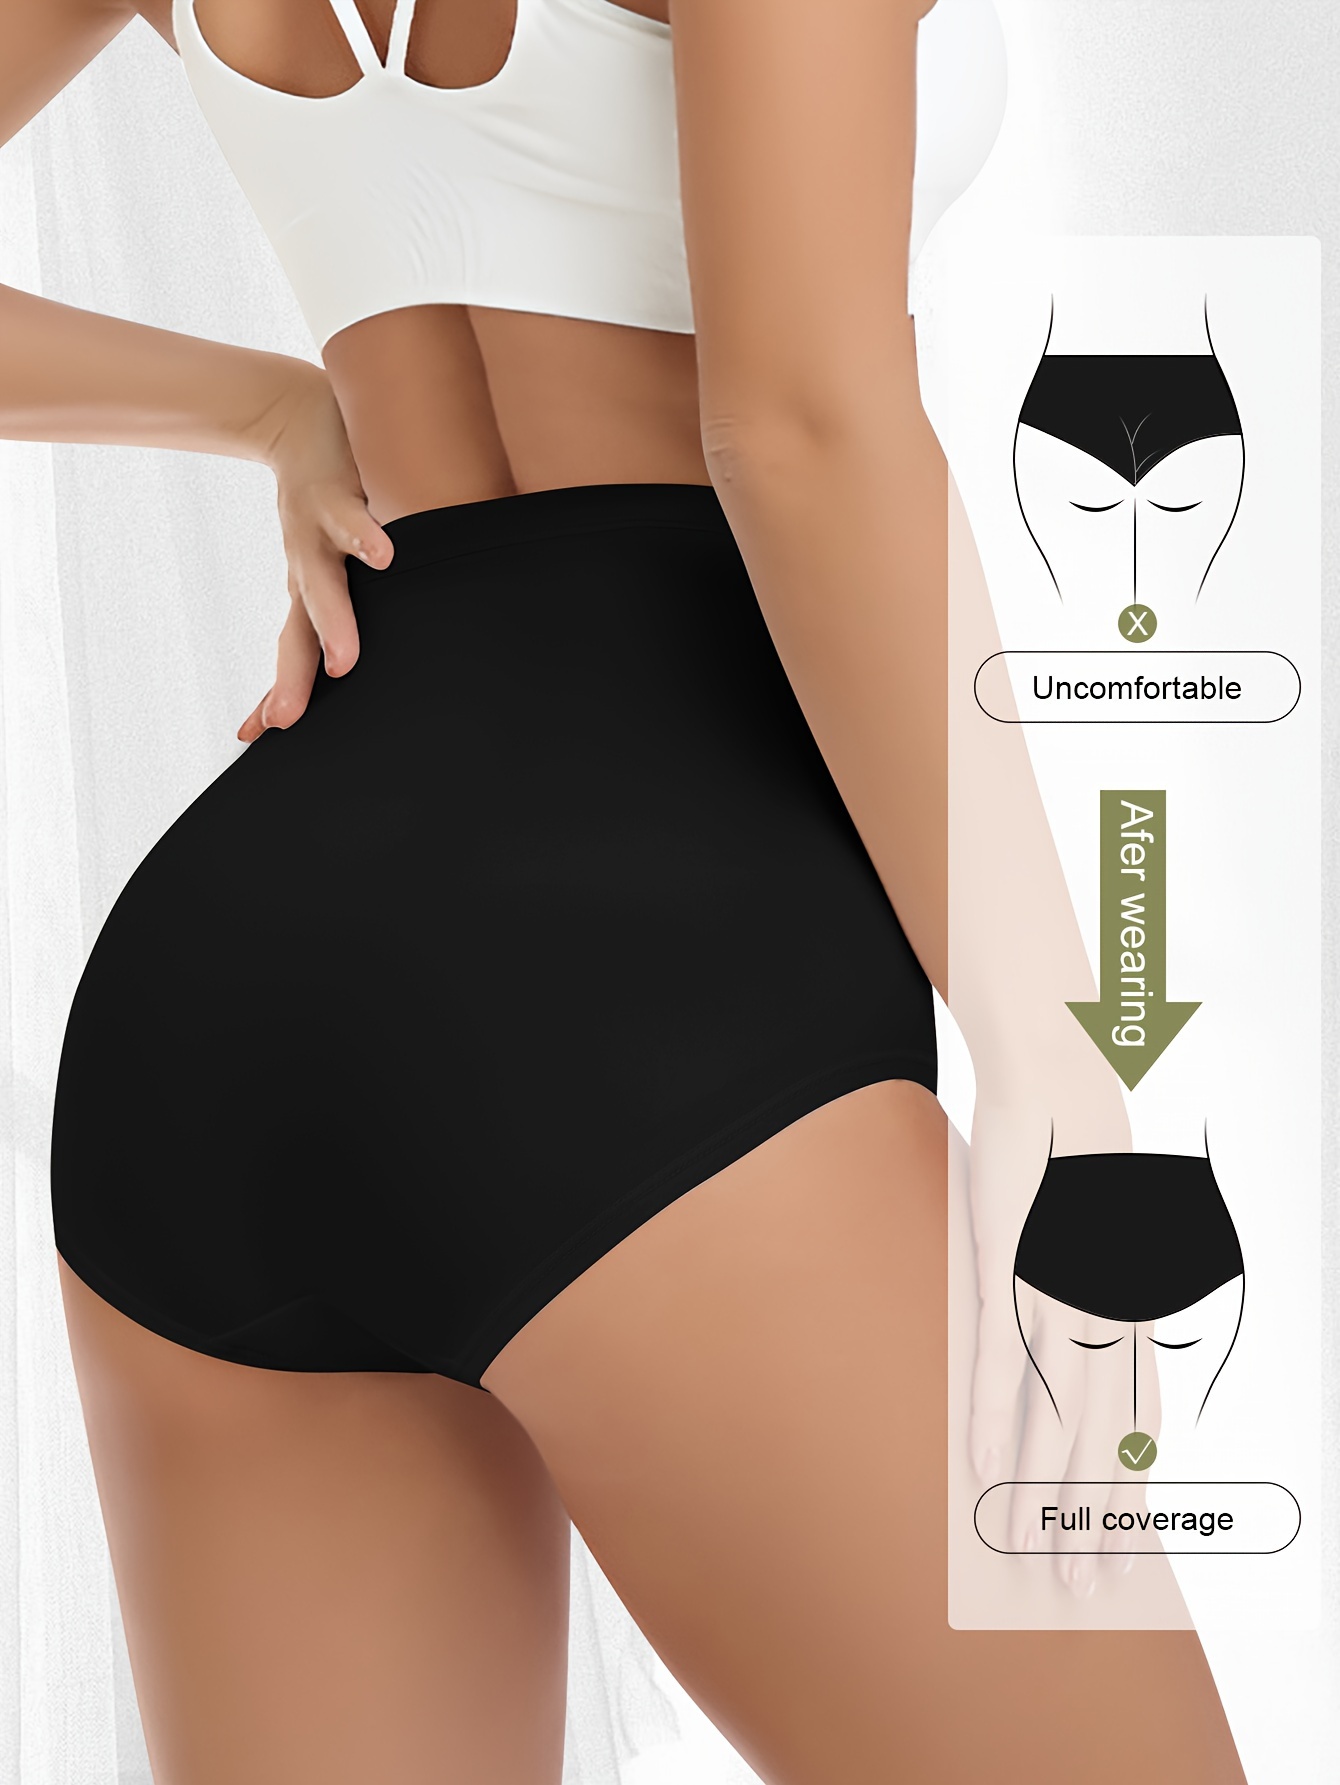 Breathable Cotton Seamless Brief Panties Set Full Coverage, Stretchy &  Comfortable No Muffins From Lu04, $15.02